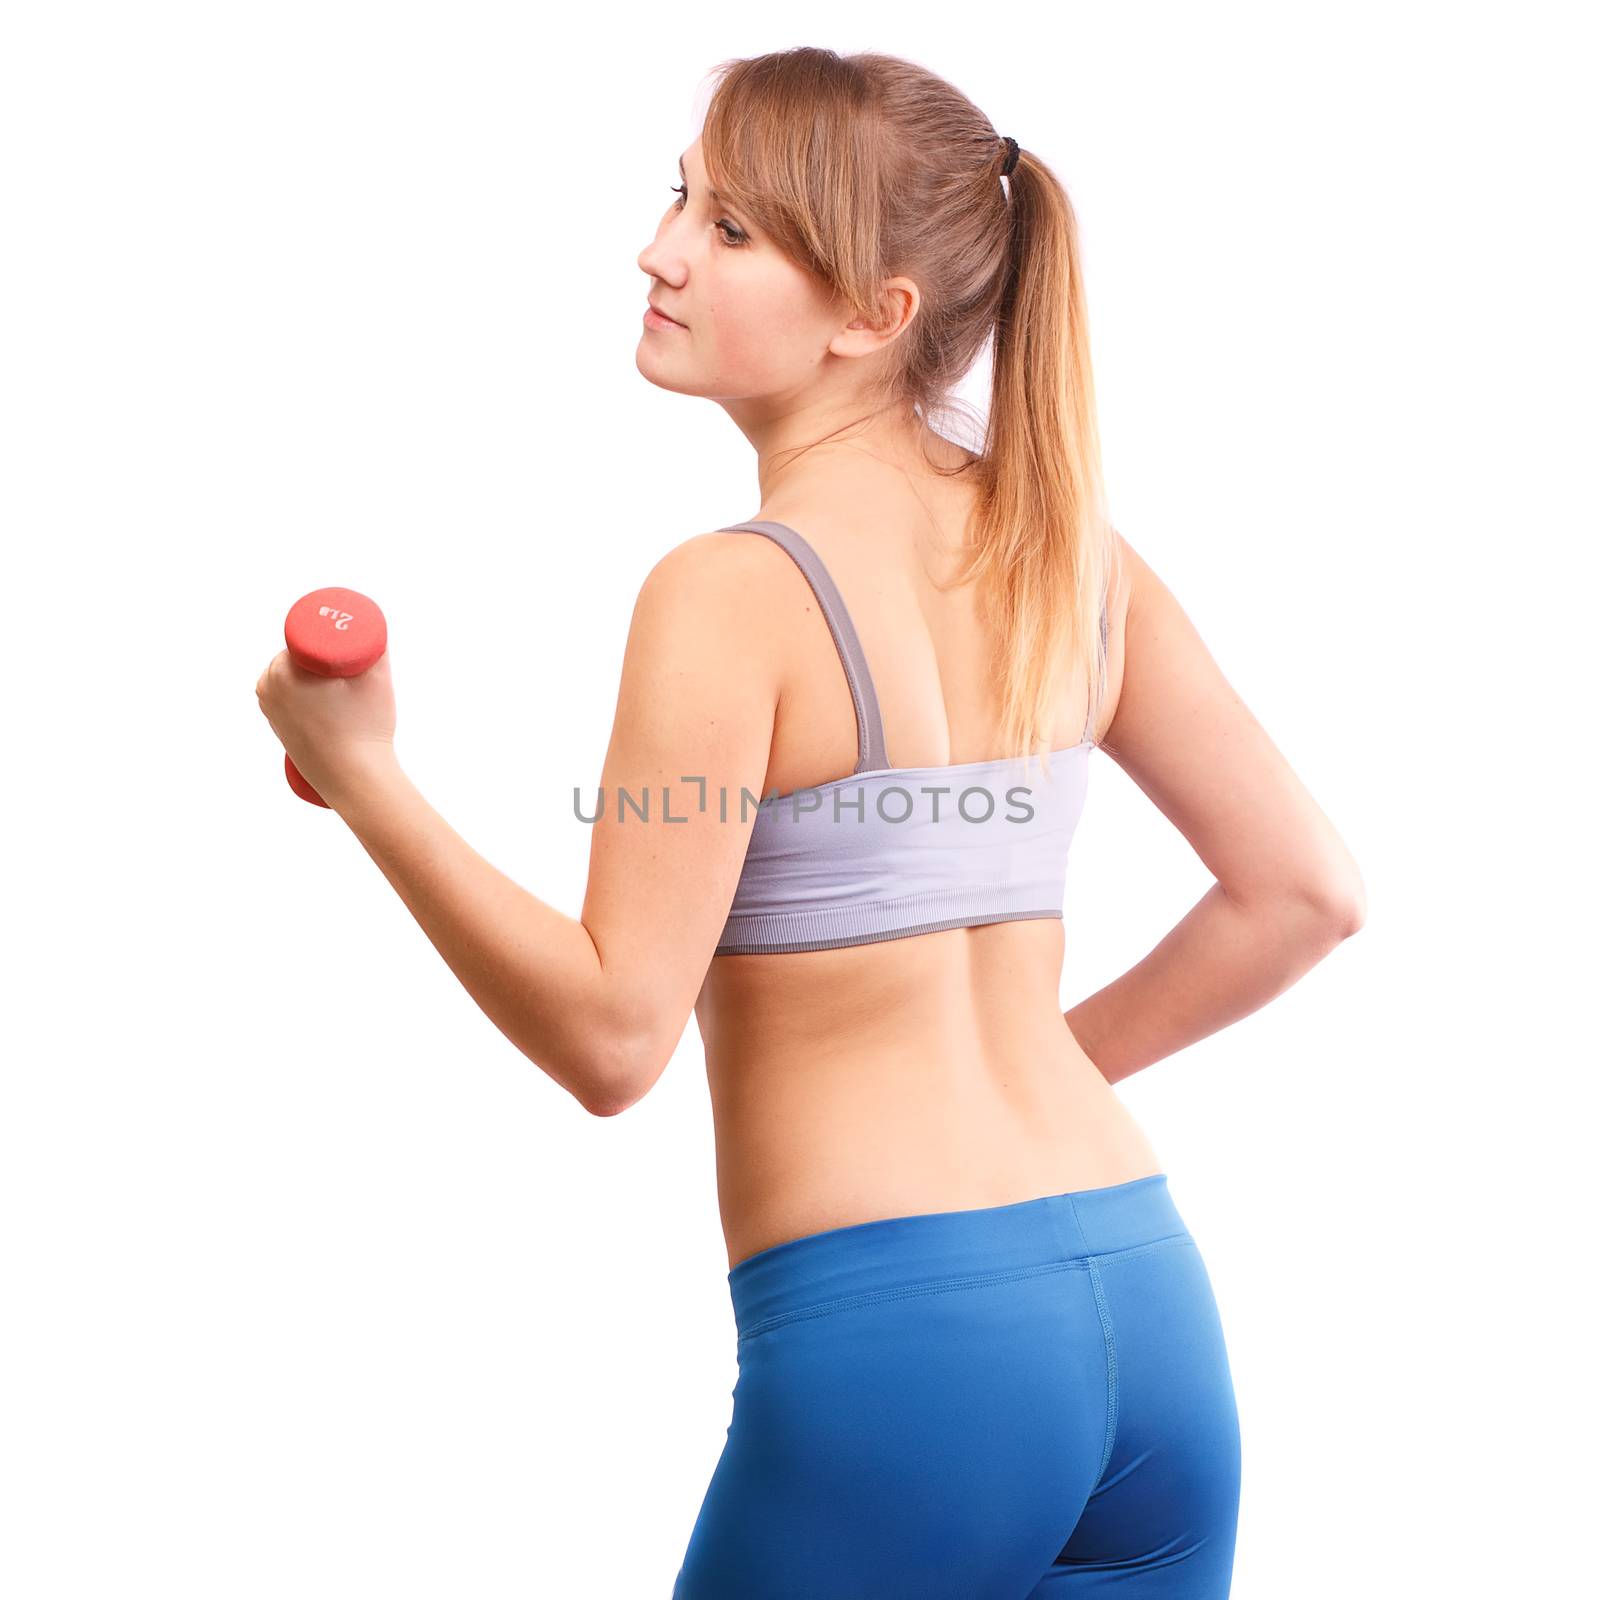 The girl goes in for sports with dumbbells on a white background.